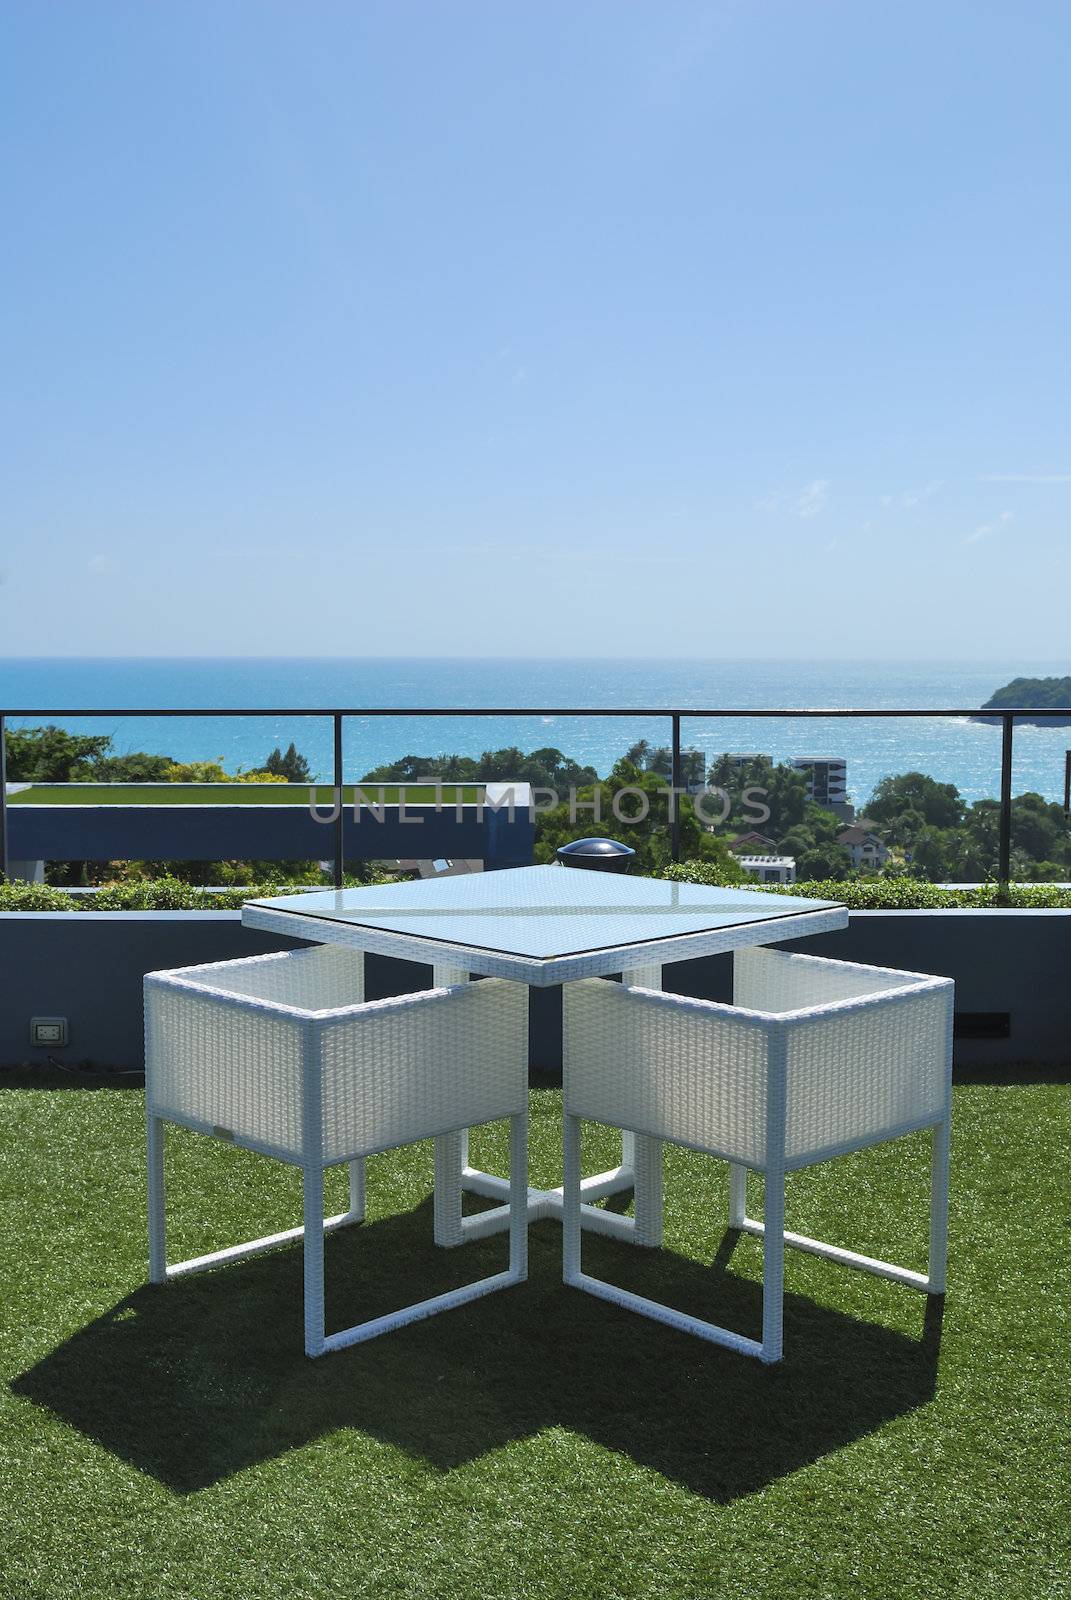 Terrace lounge with white rattan armchairs and seaview in a luxury resort .